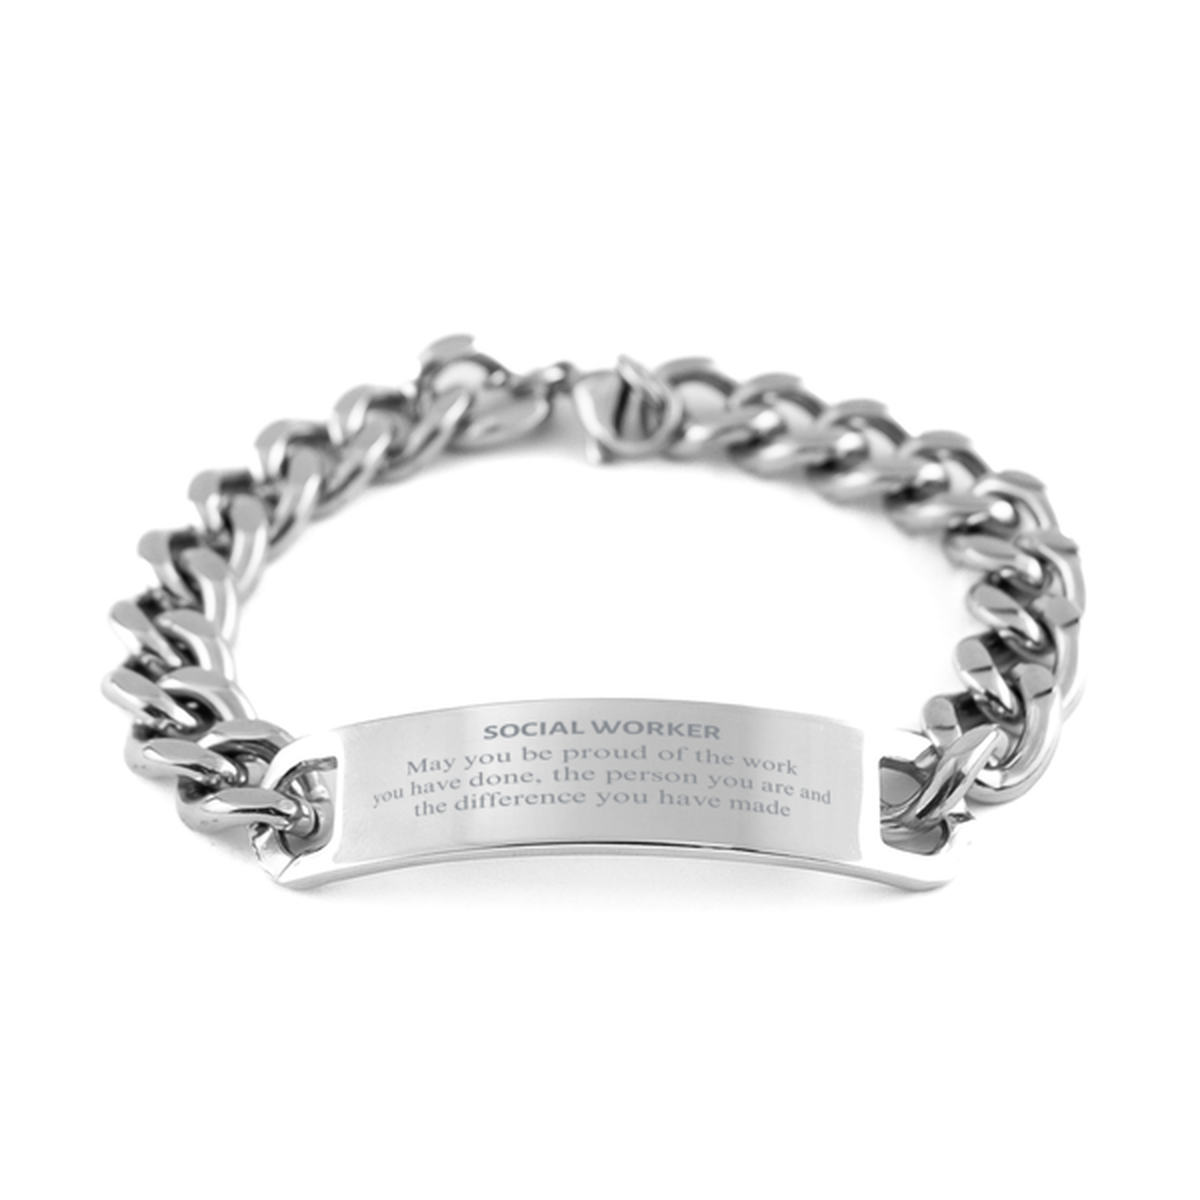 Social Worker May you be proud of the work you have done, Retirement Social Worker Cuban Chain Stainless Steel Bracelet for Colleague Appreciation Gifts Amazing for Social Worker